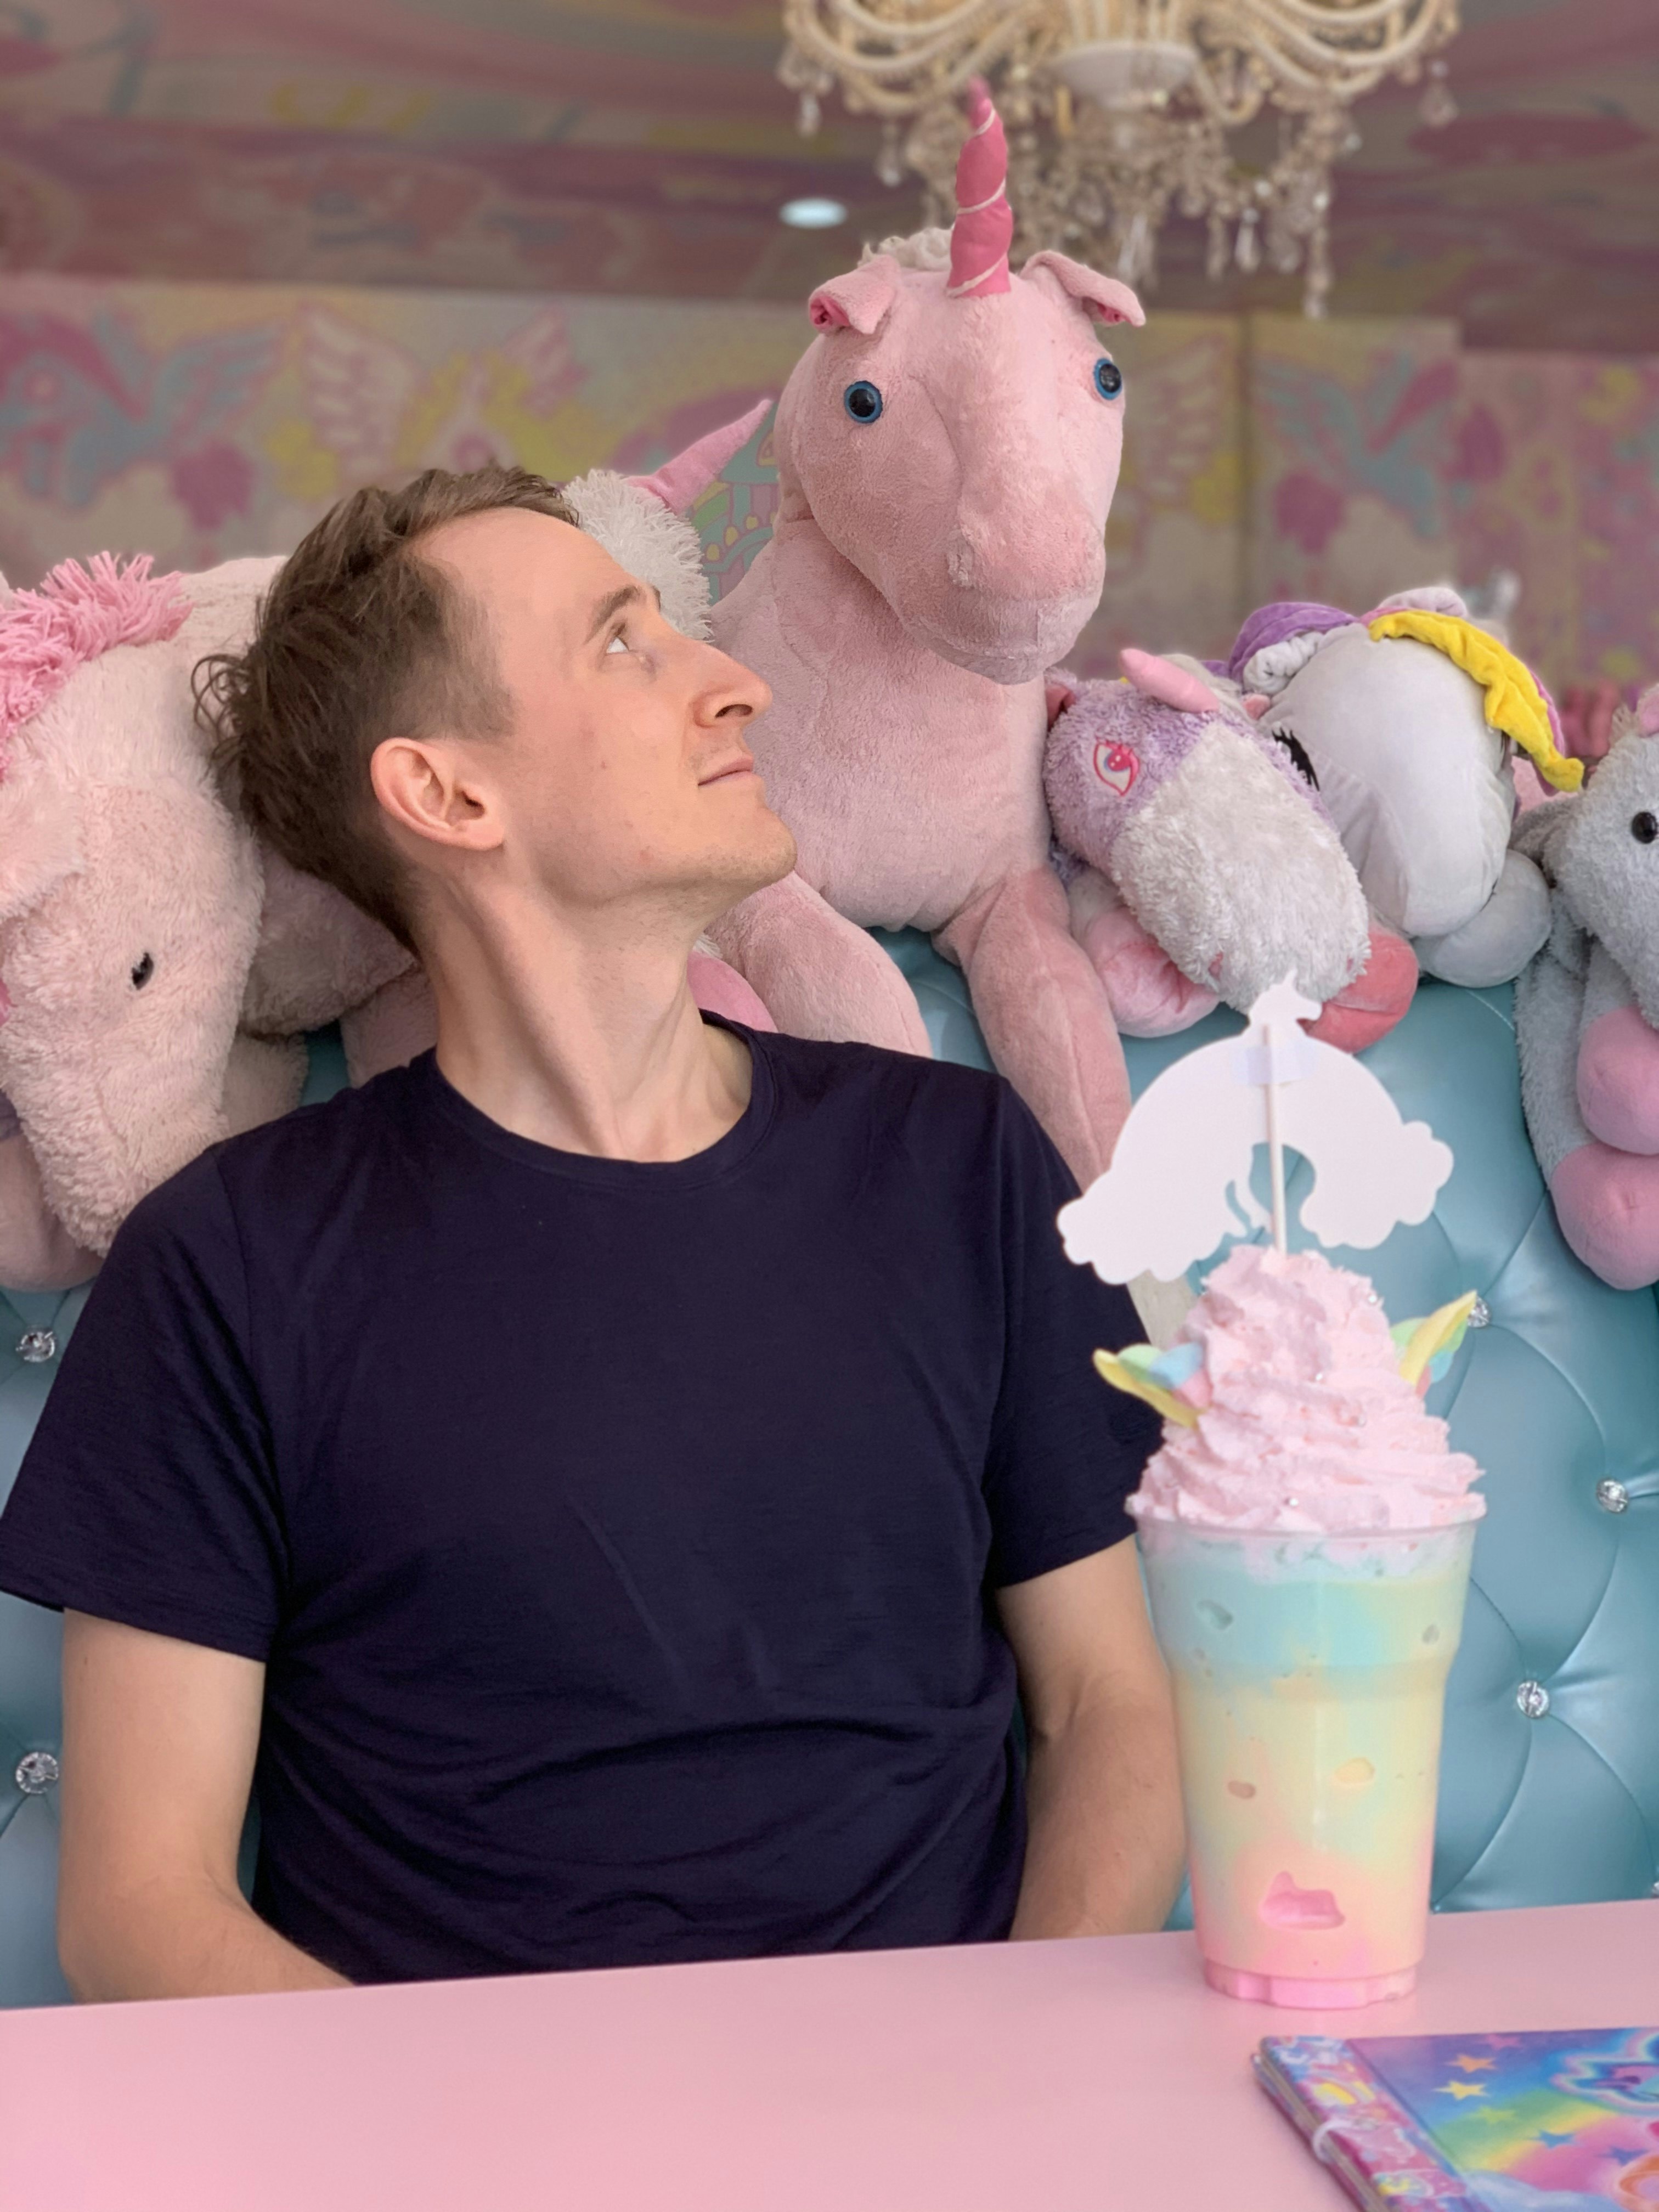 A man in a black t-shirt looking at a pink unicorn